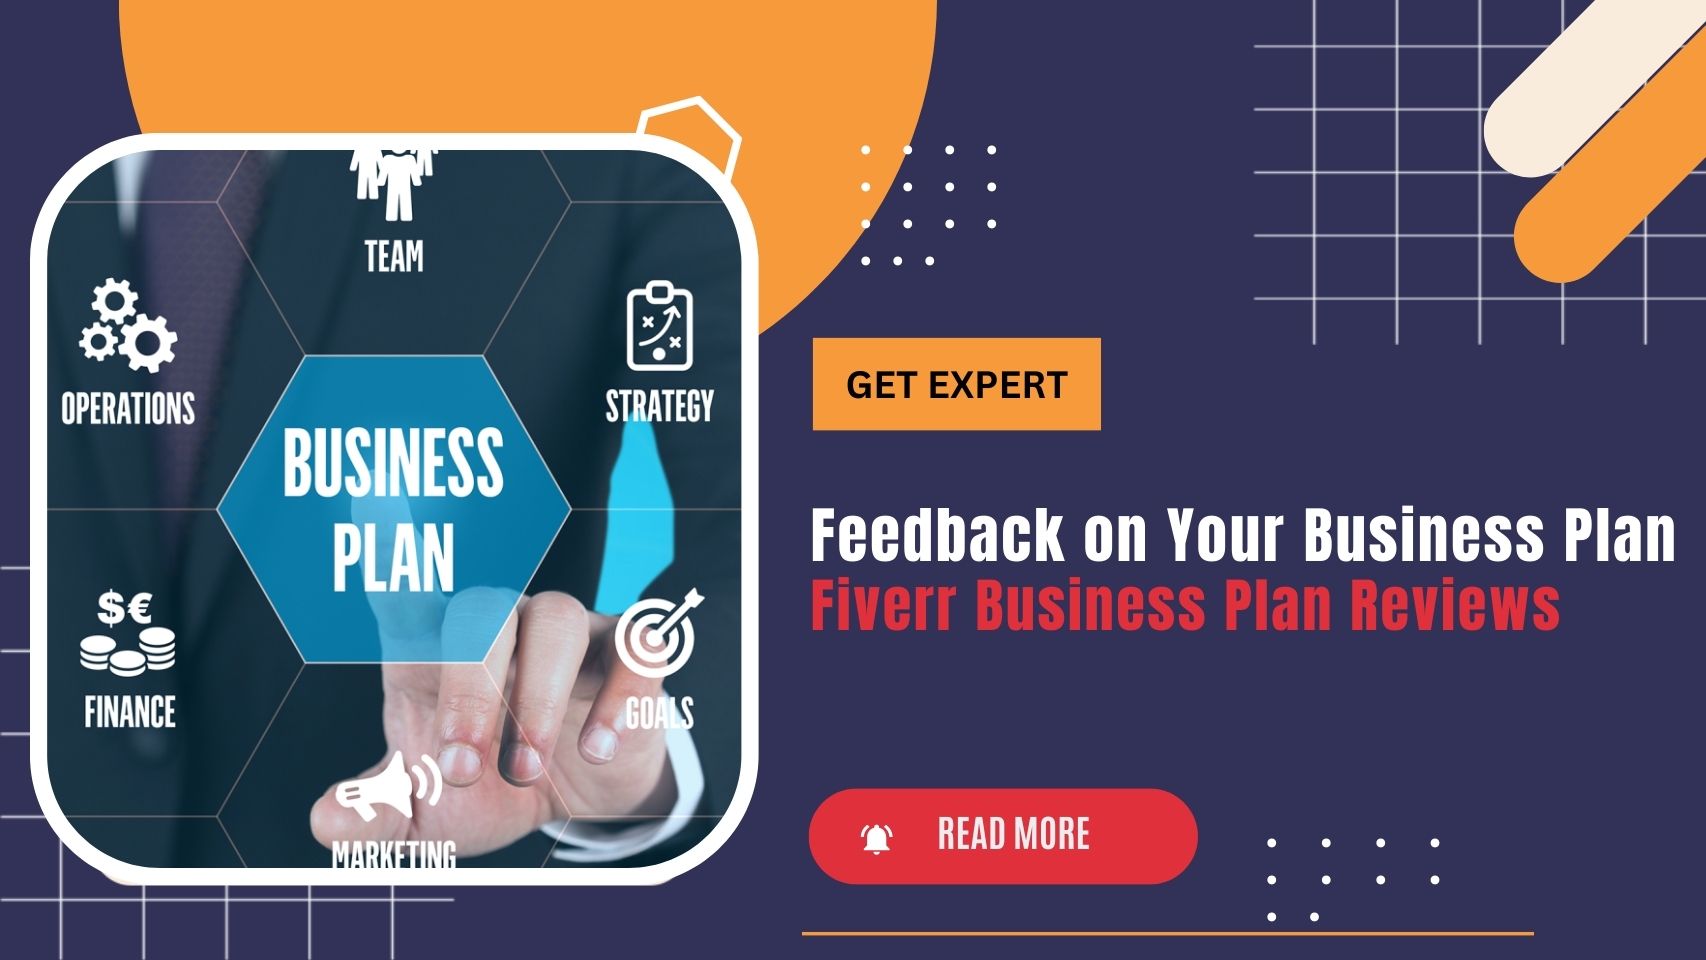 Fiverr Business Plan Reviews: Get Expert Feedback on Your Business Plan